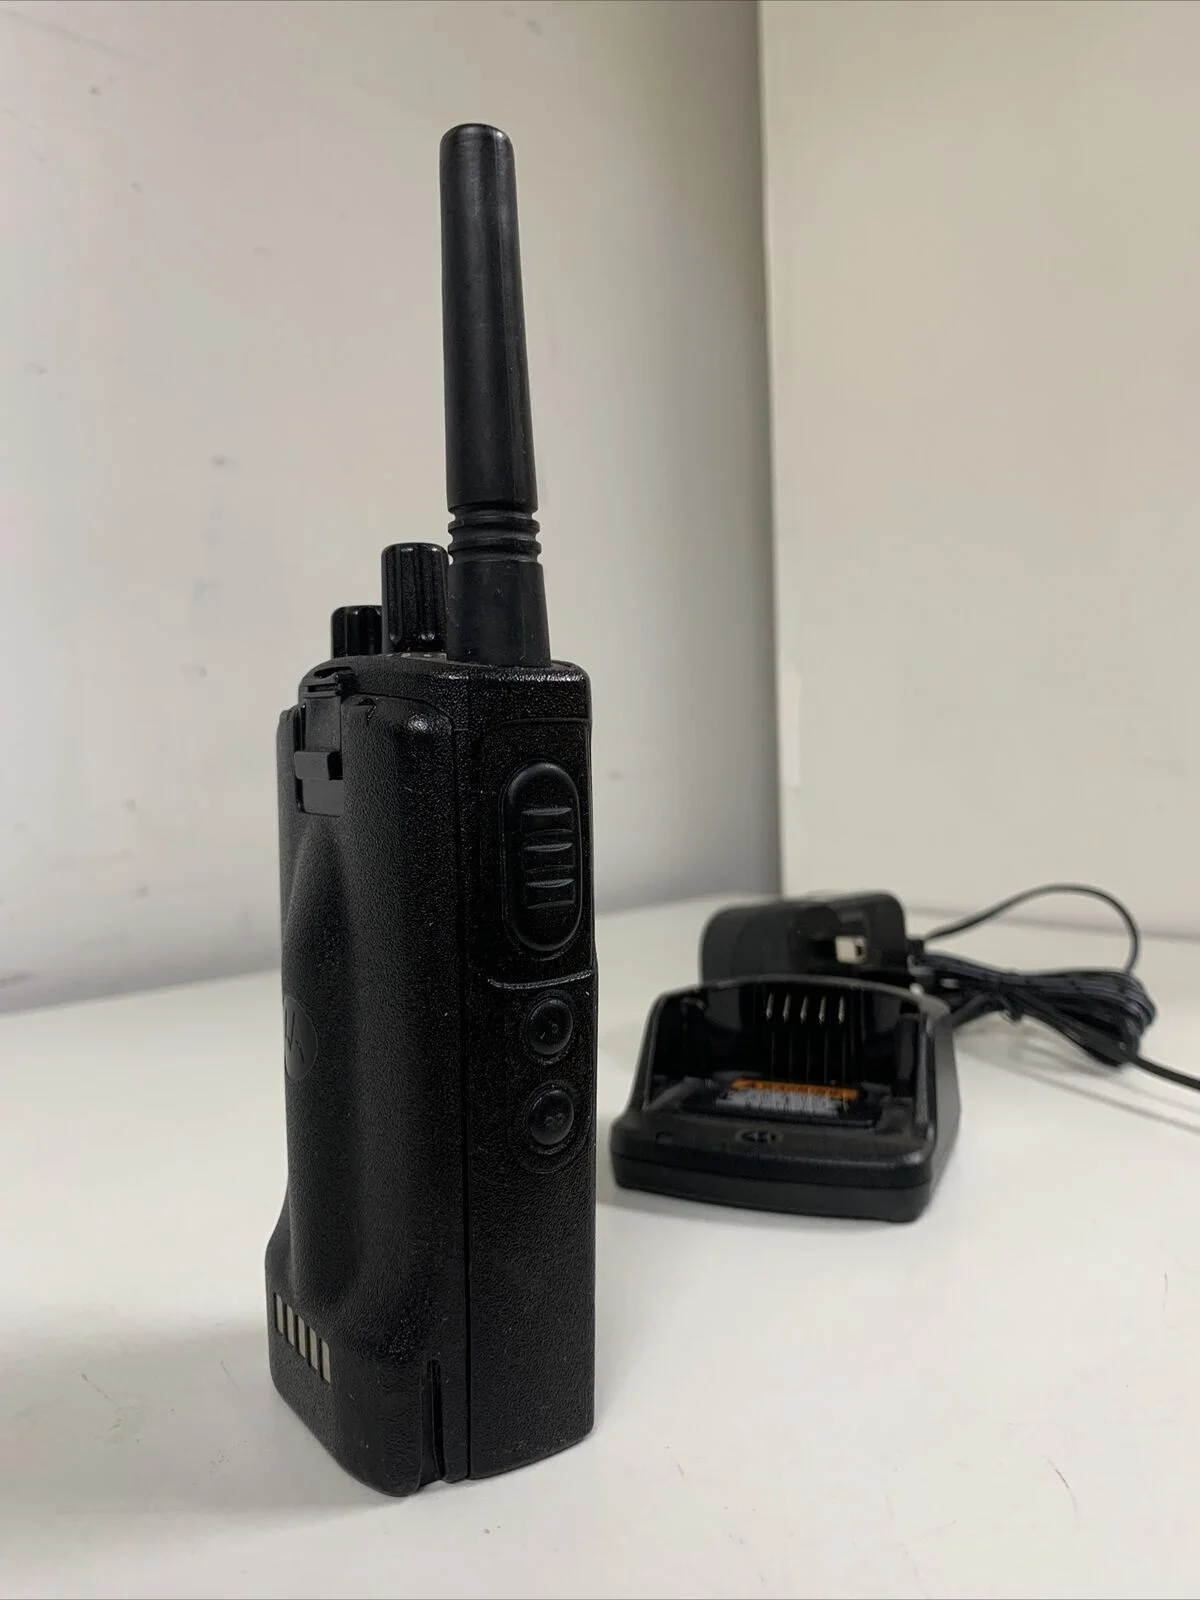 2022.ML1 XT420 PMR446 Walkie Talkie Two Way Radio New With Charger UK Plug enlarge